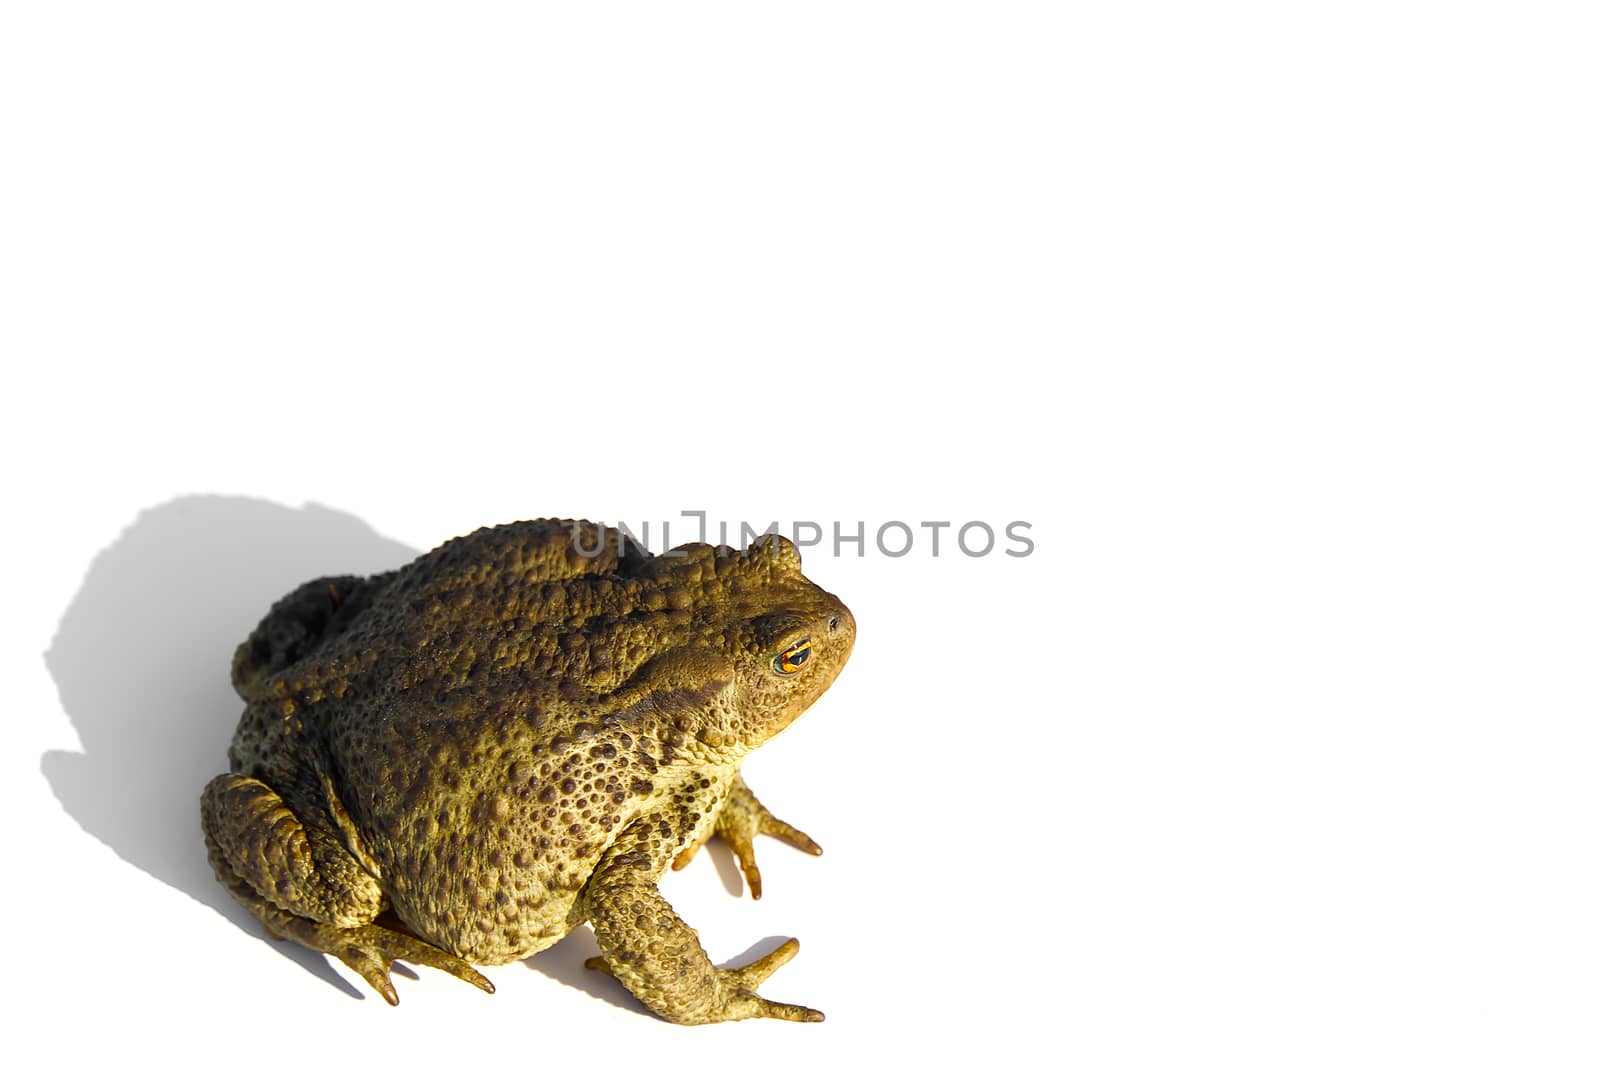 Common toad or European toad, Bufo bufo, isolated on white background